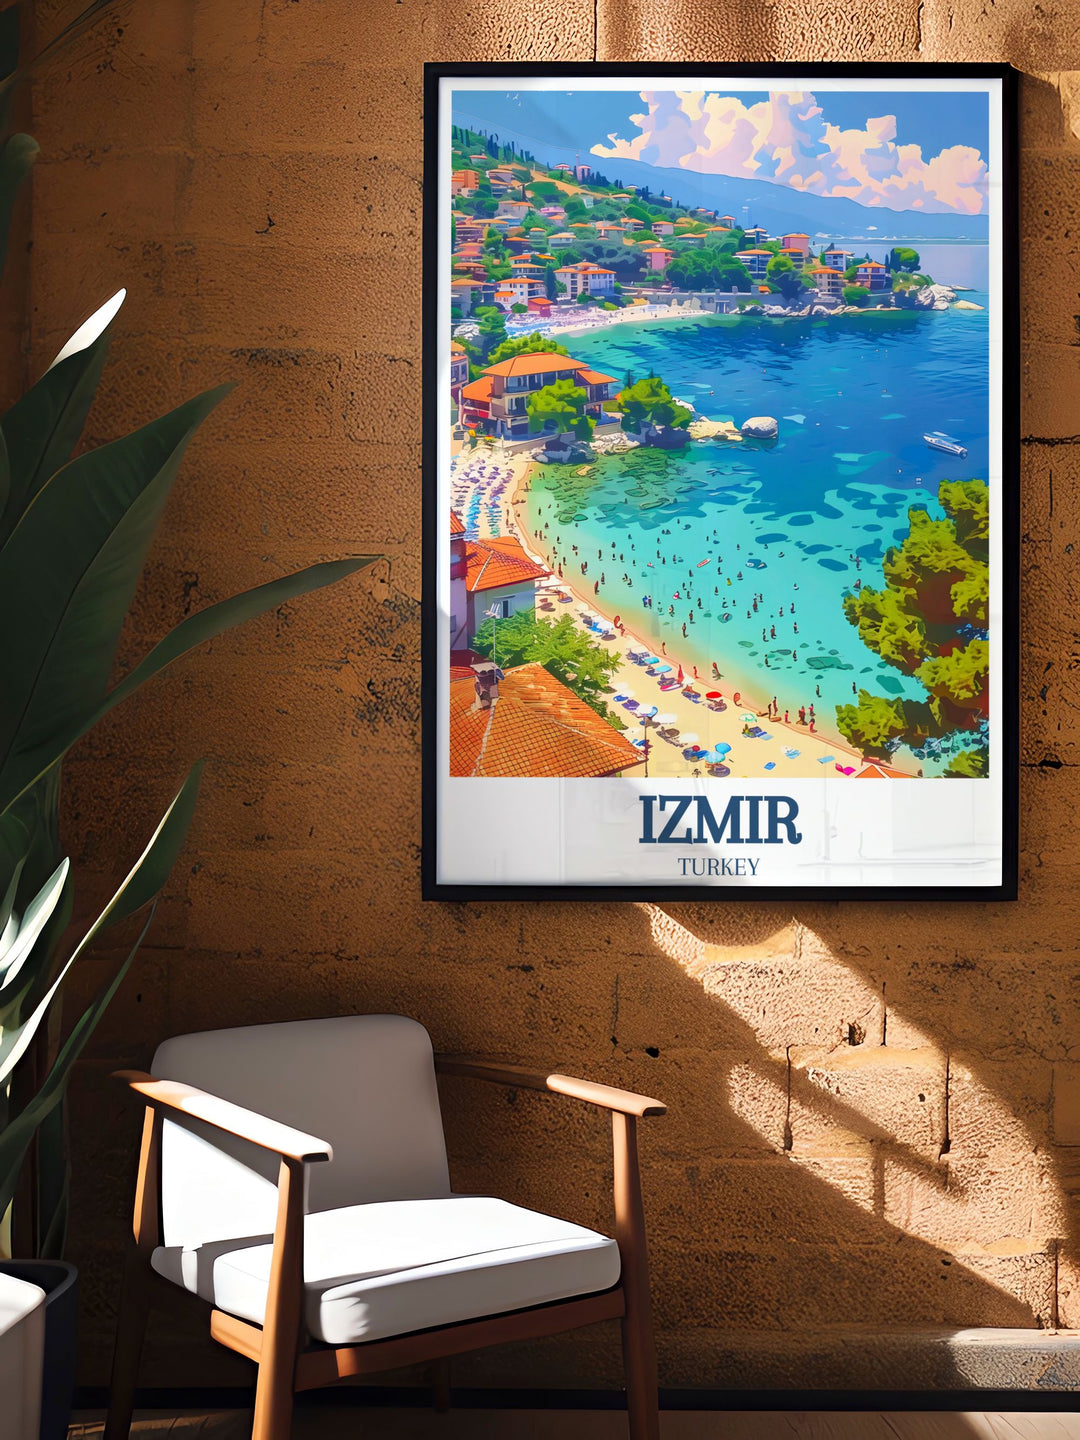 The vibrant colors and detailed illustrations of Akkum Beach and the Atlantis Peninsula are captured in this poster, celebrating the scenic and cultural richness of Izmir.